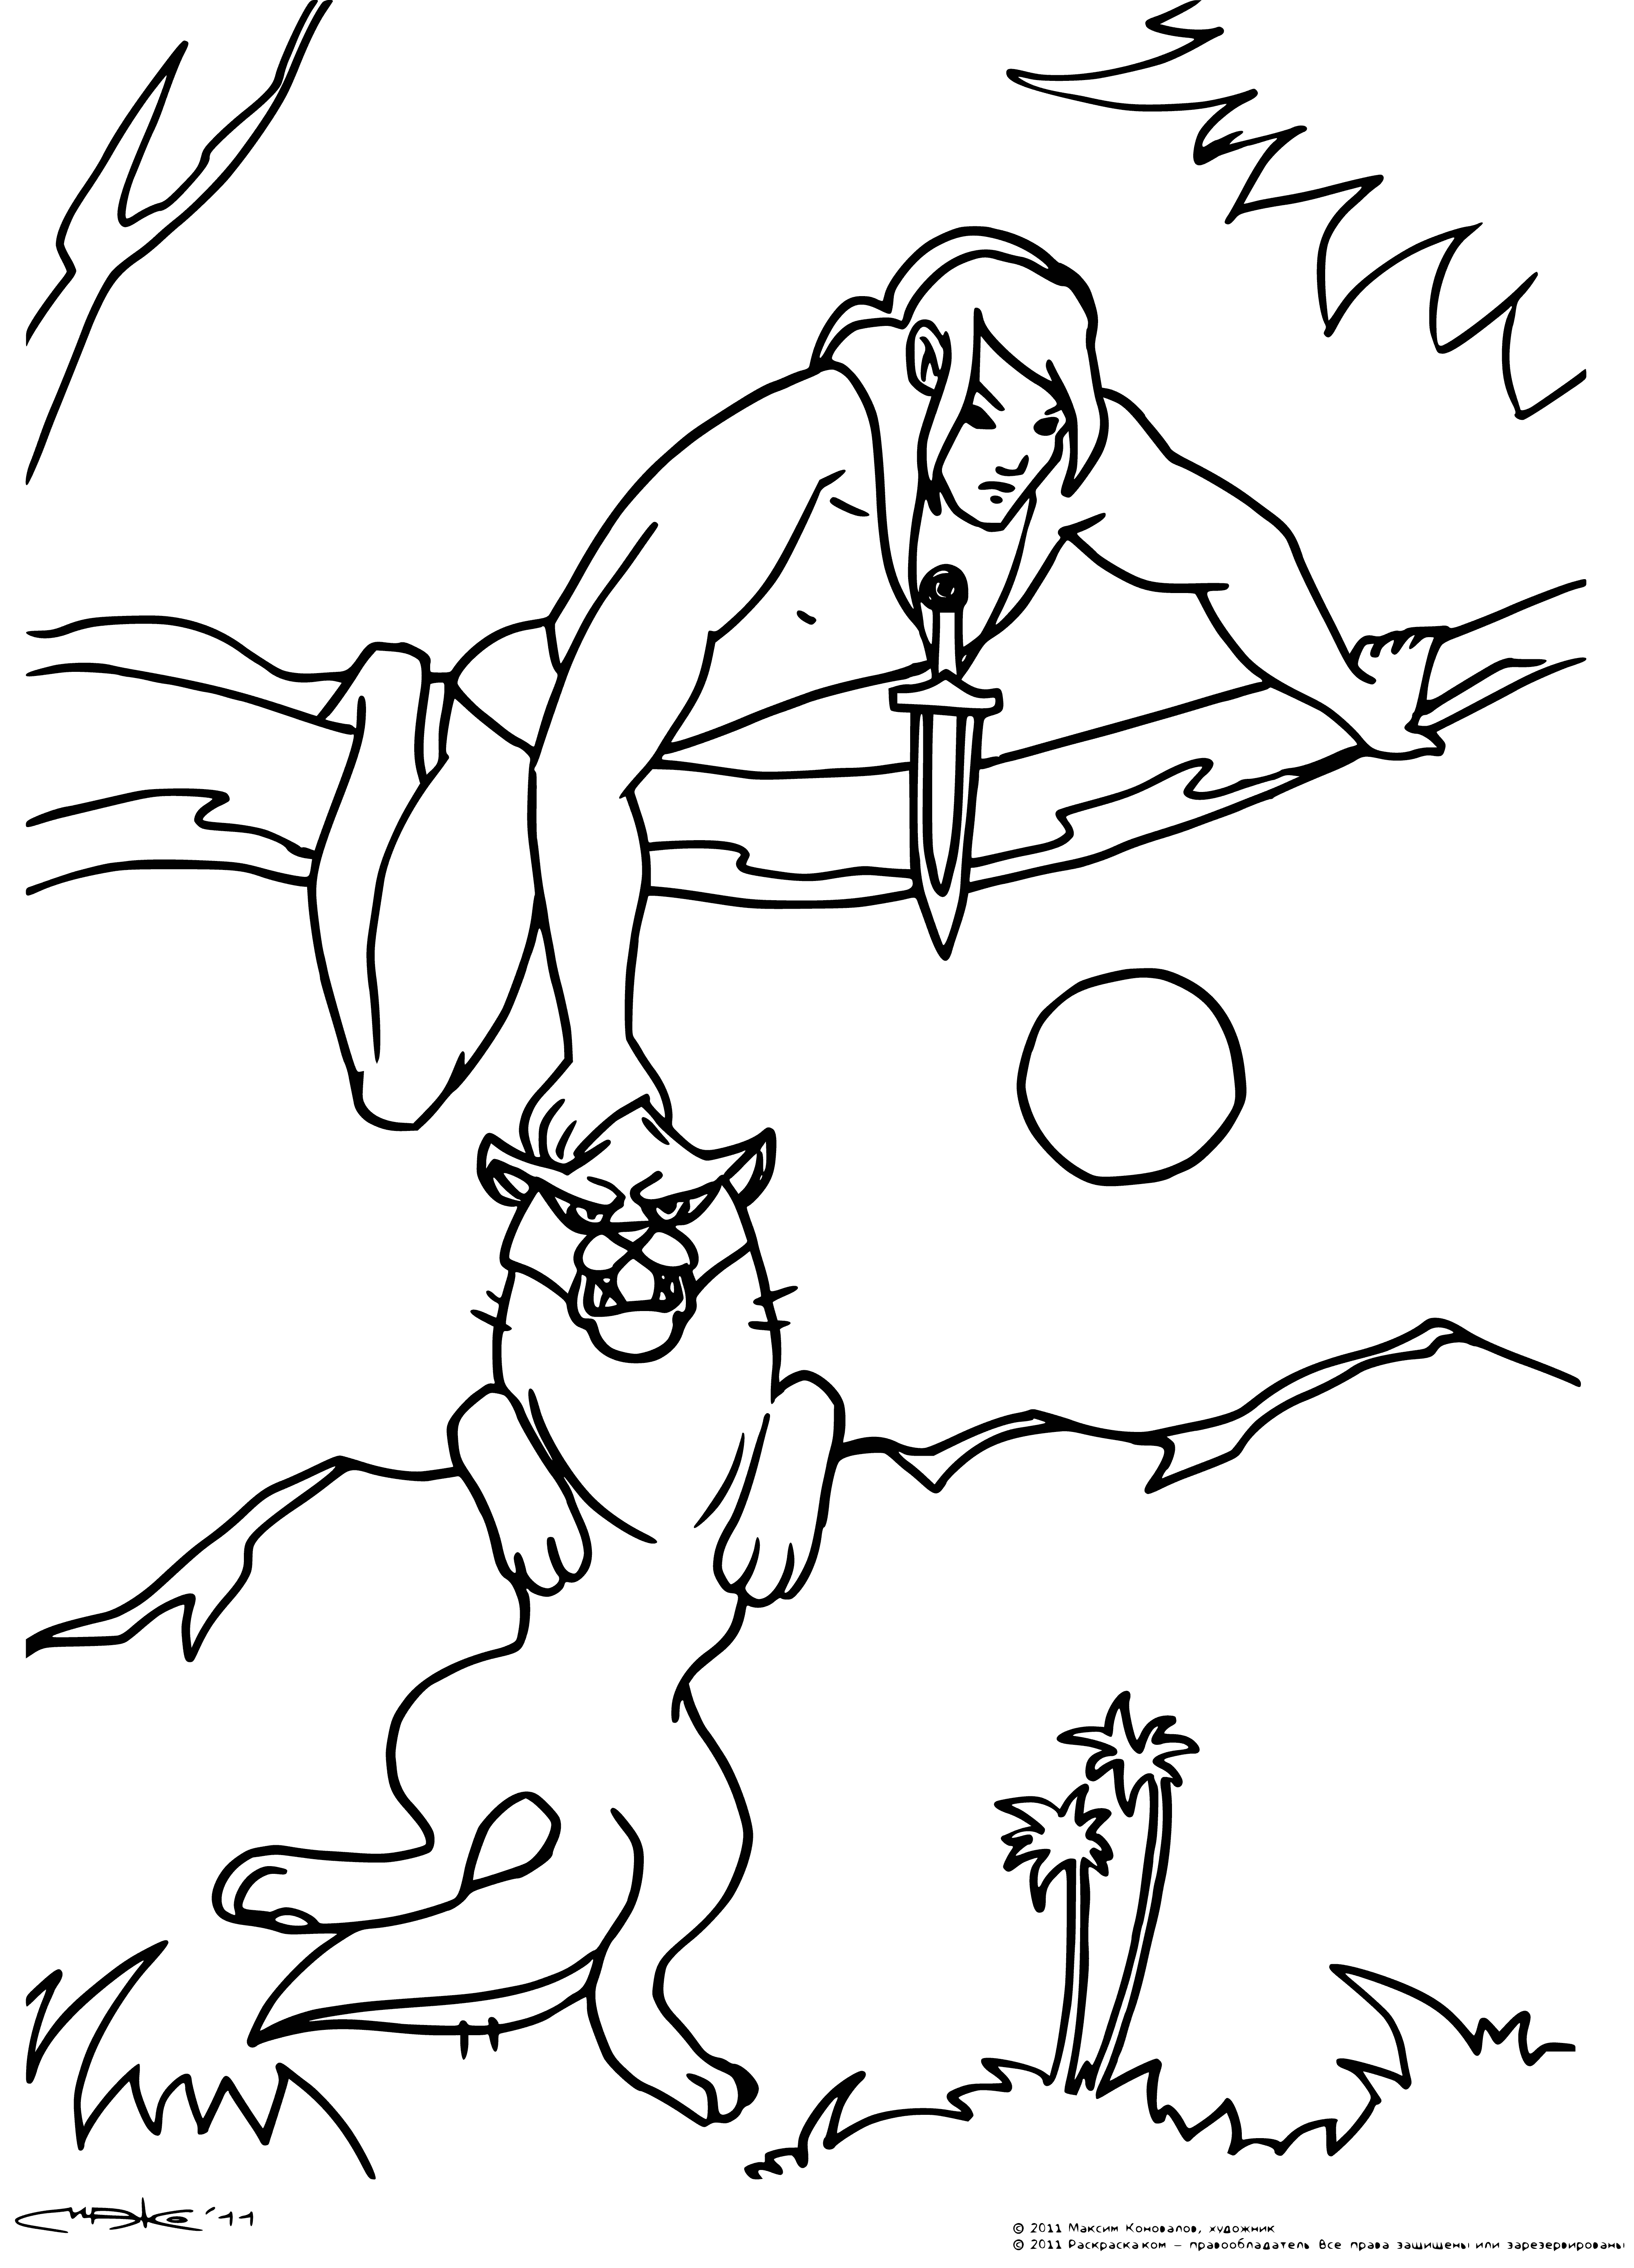 coloring page: Two happy dogs, one brown and one tan, standing in a grassy field, wagging their tails.